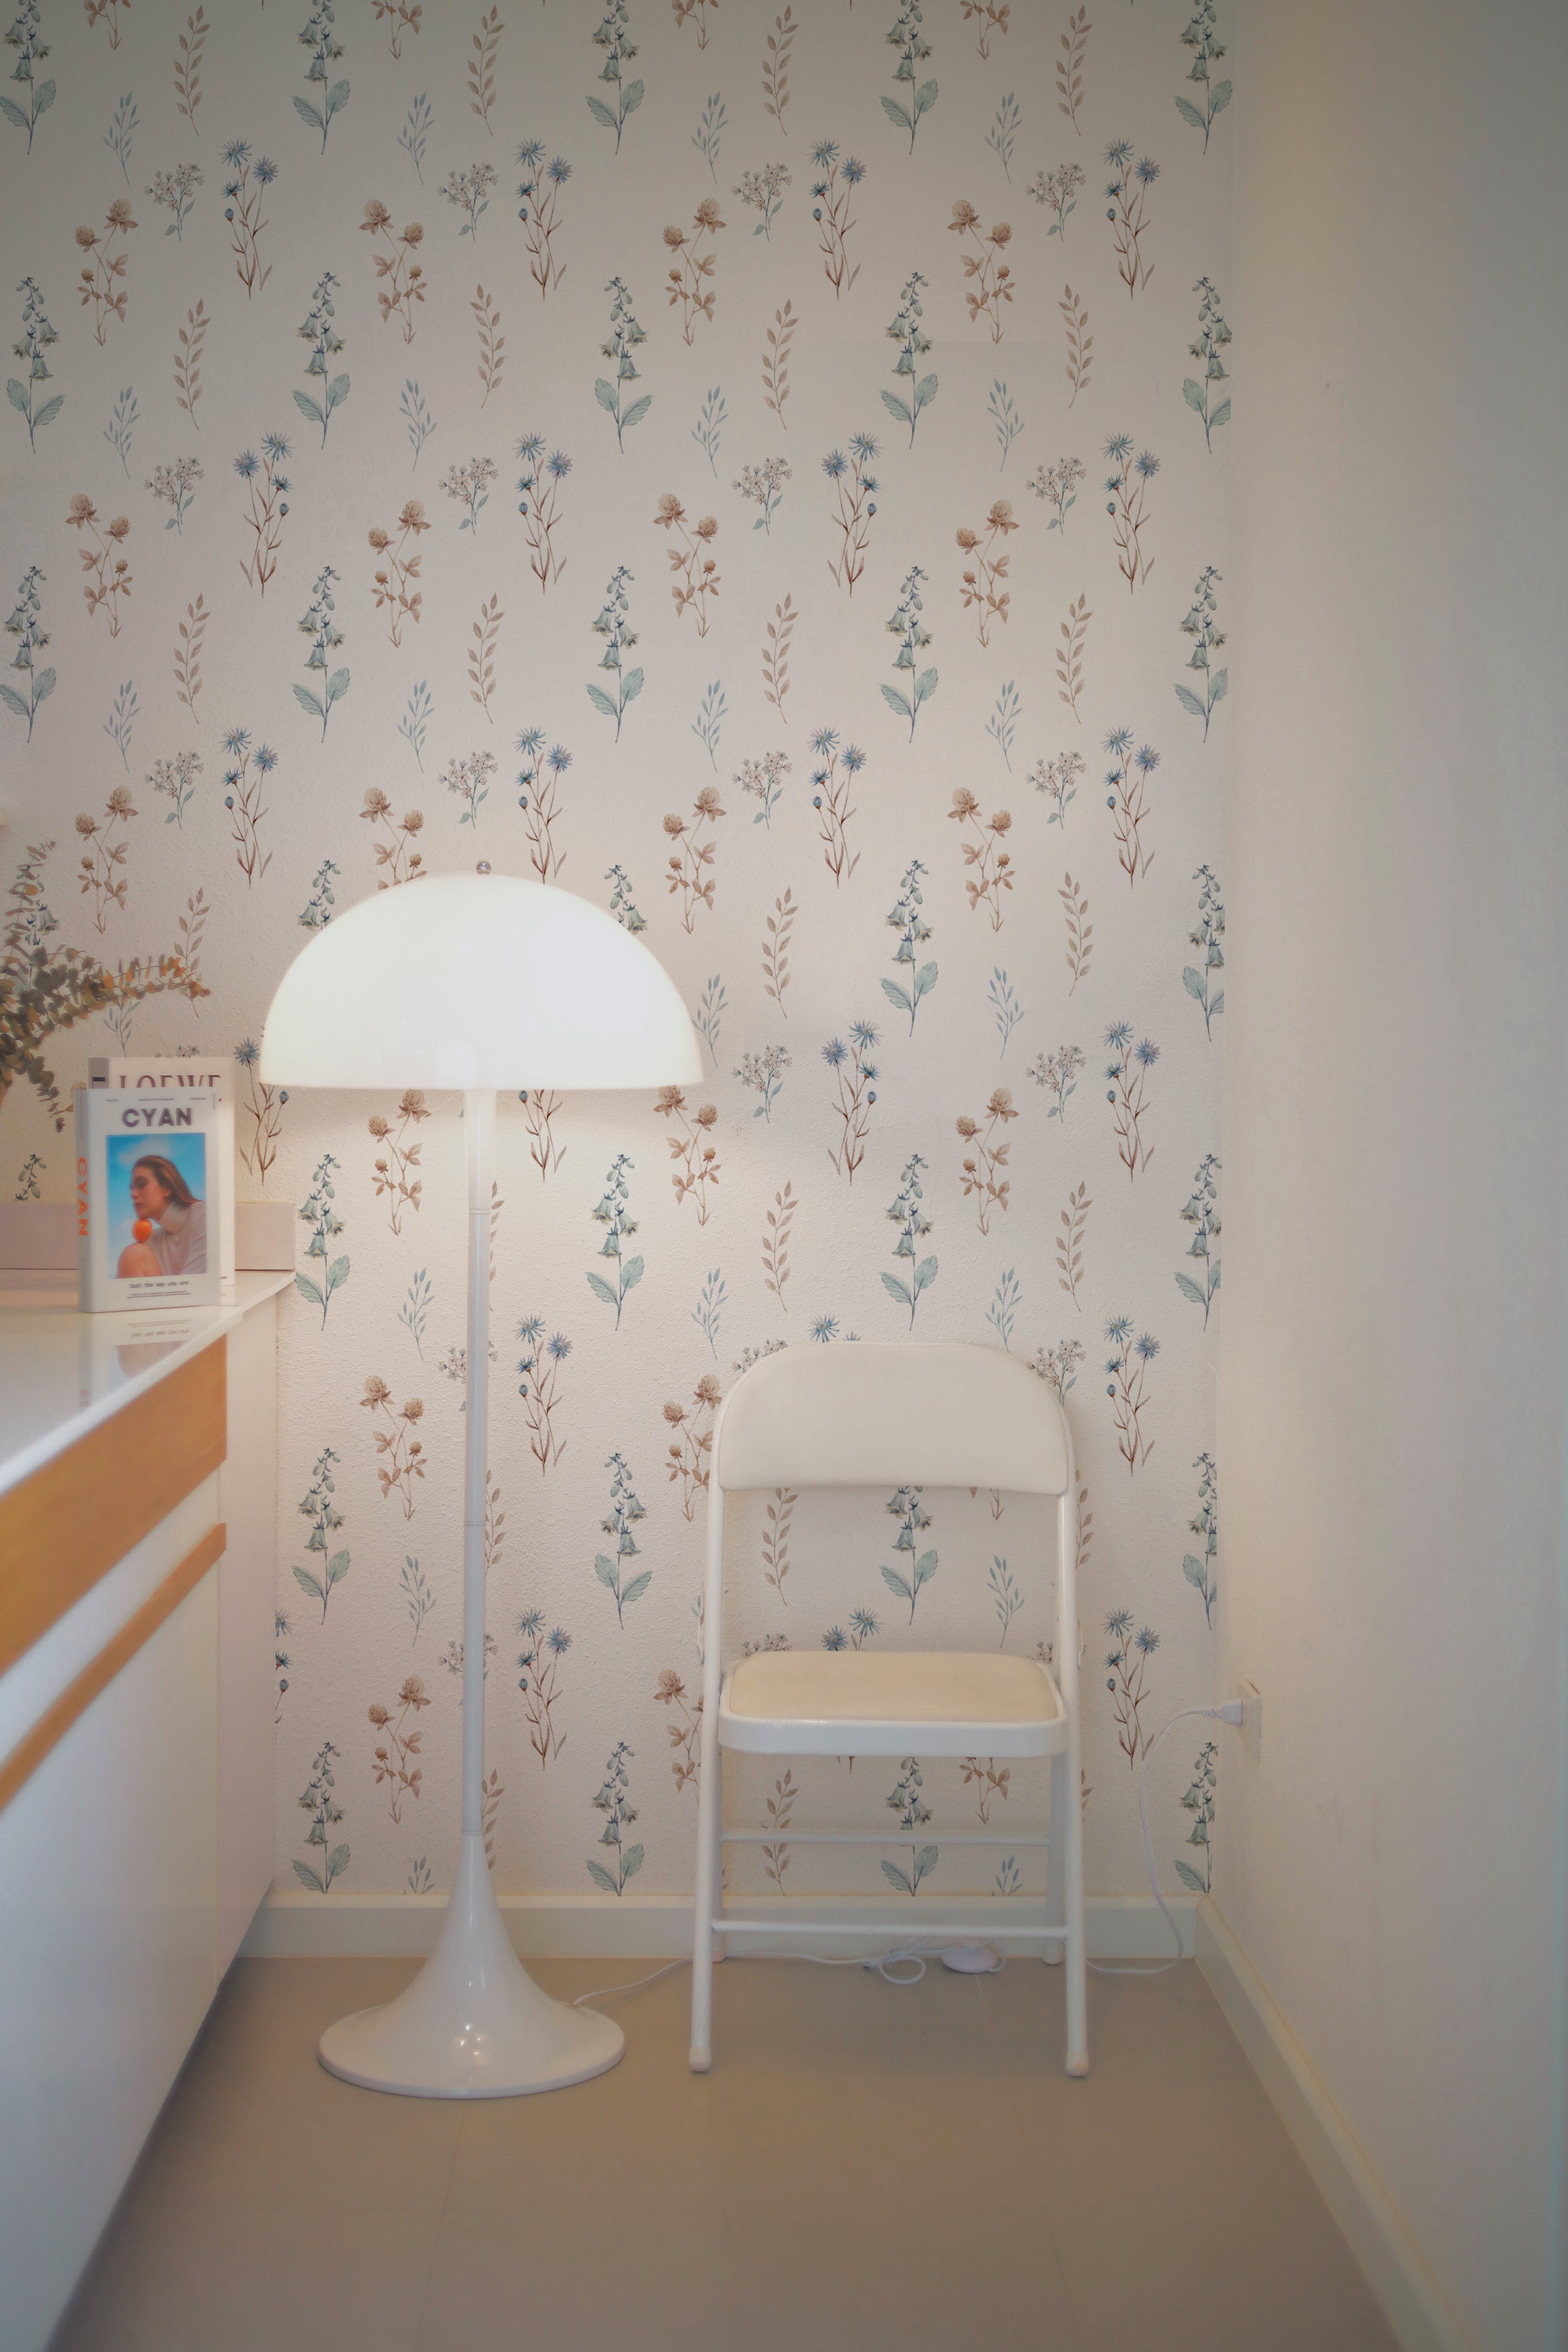 A cozy corner featuring Bluebell Floral Wallpaper with delicate botanical patterns in shades of blue, beige, and green. The scene includes a stylish white floor lamp and a chair, enhancing a serene, light-filled room.